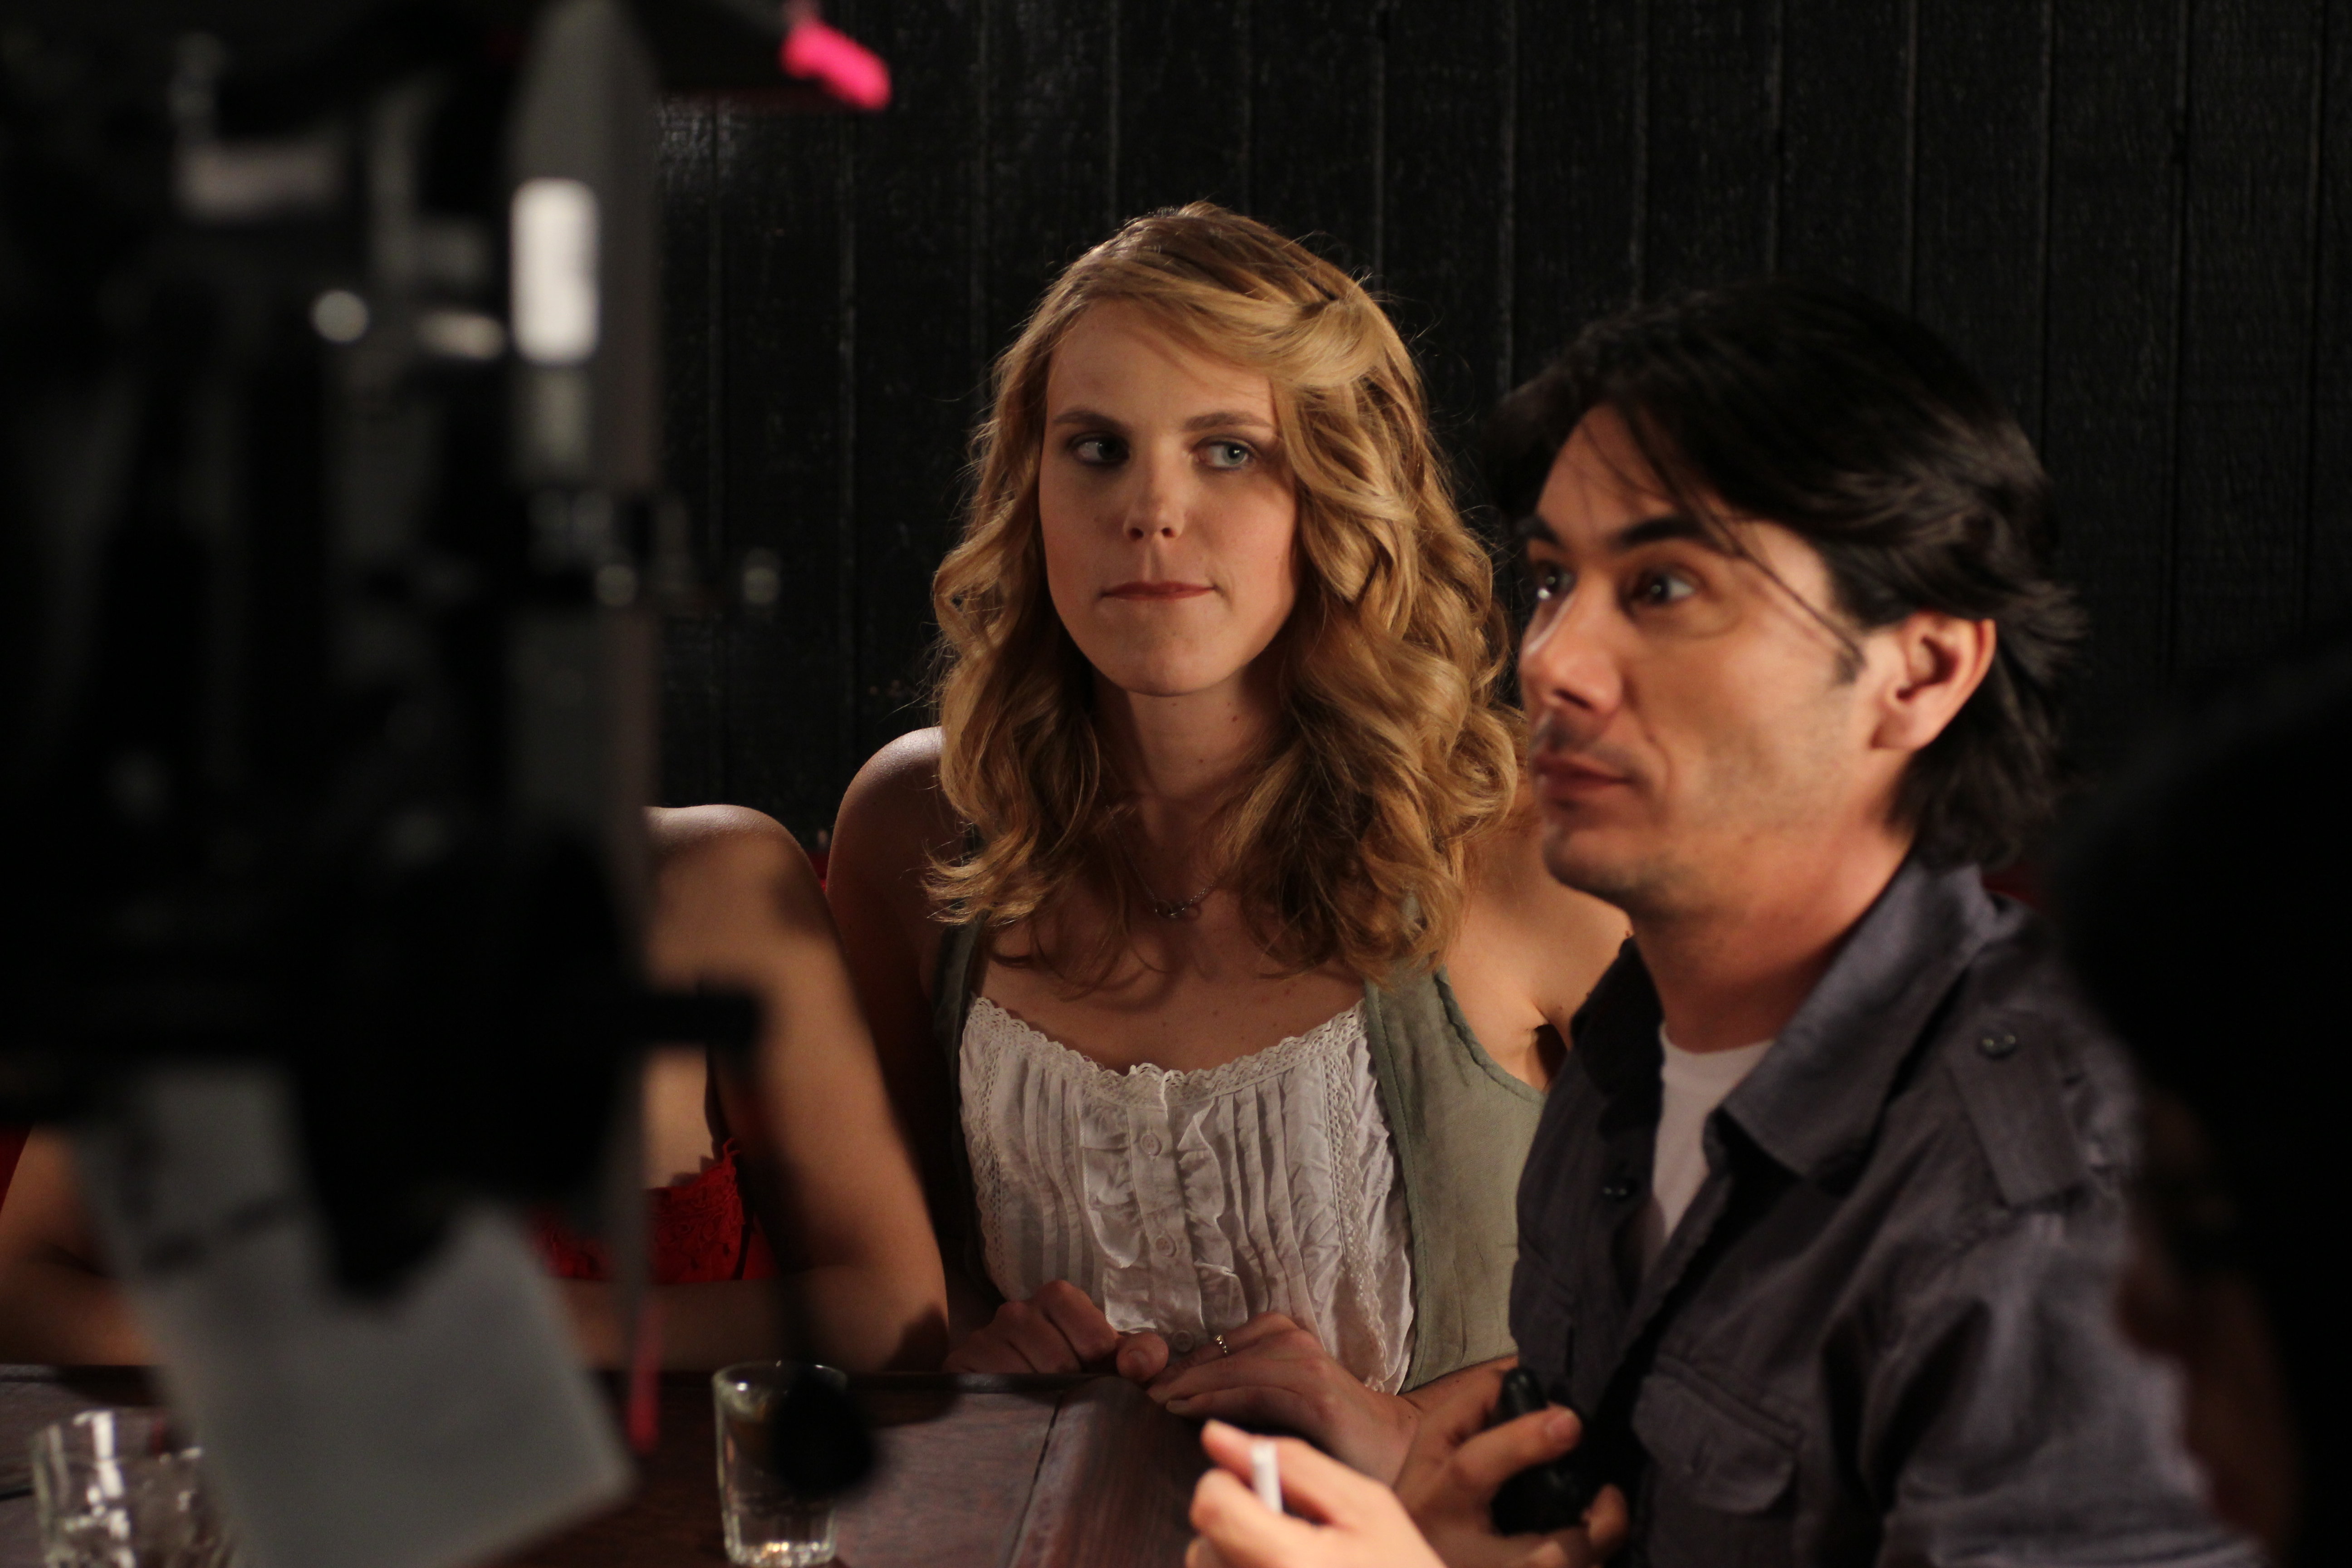 James Duval and Jill Hoiles in Look at Me (2012)